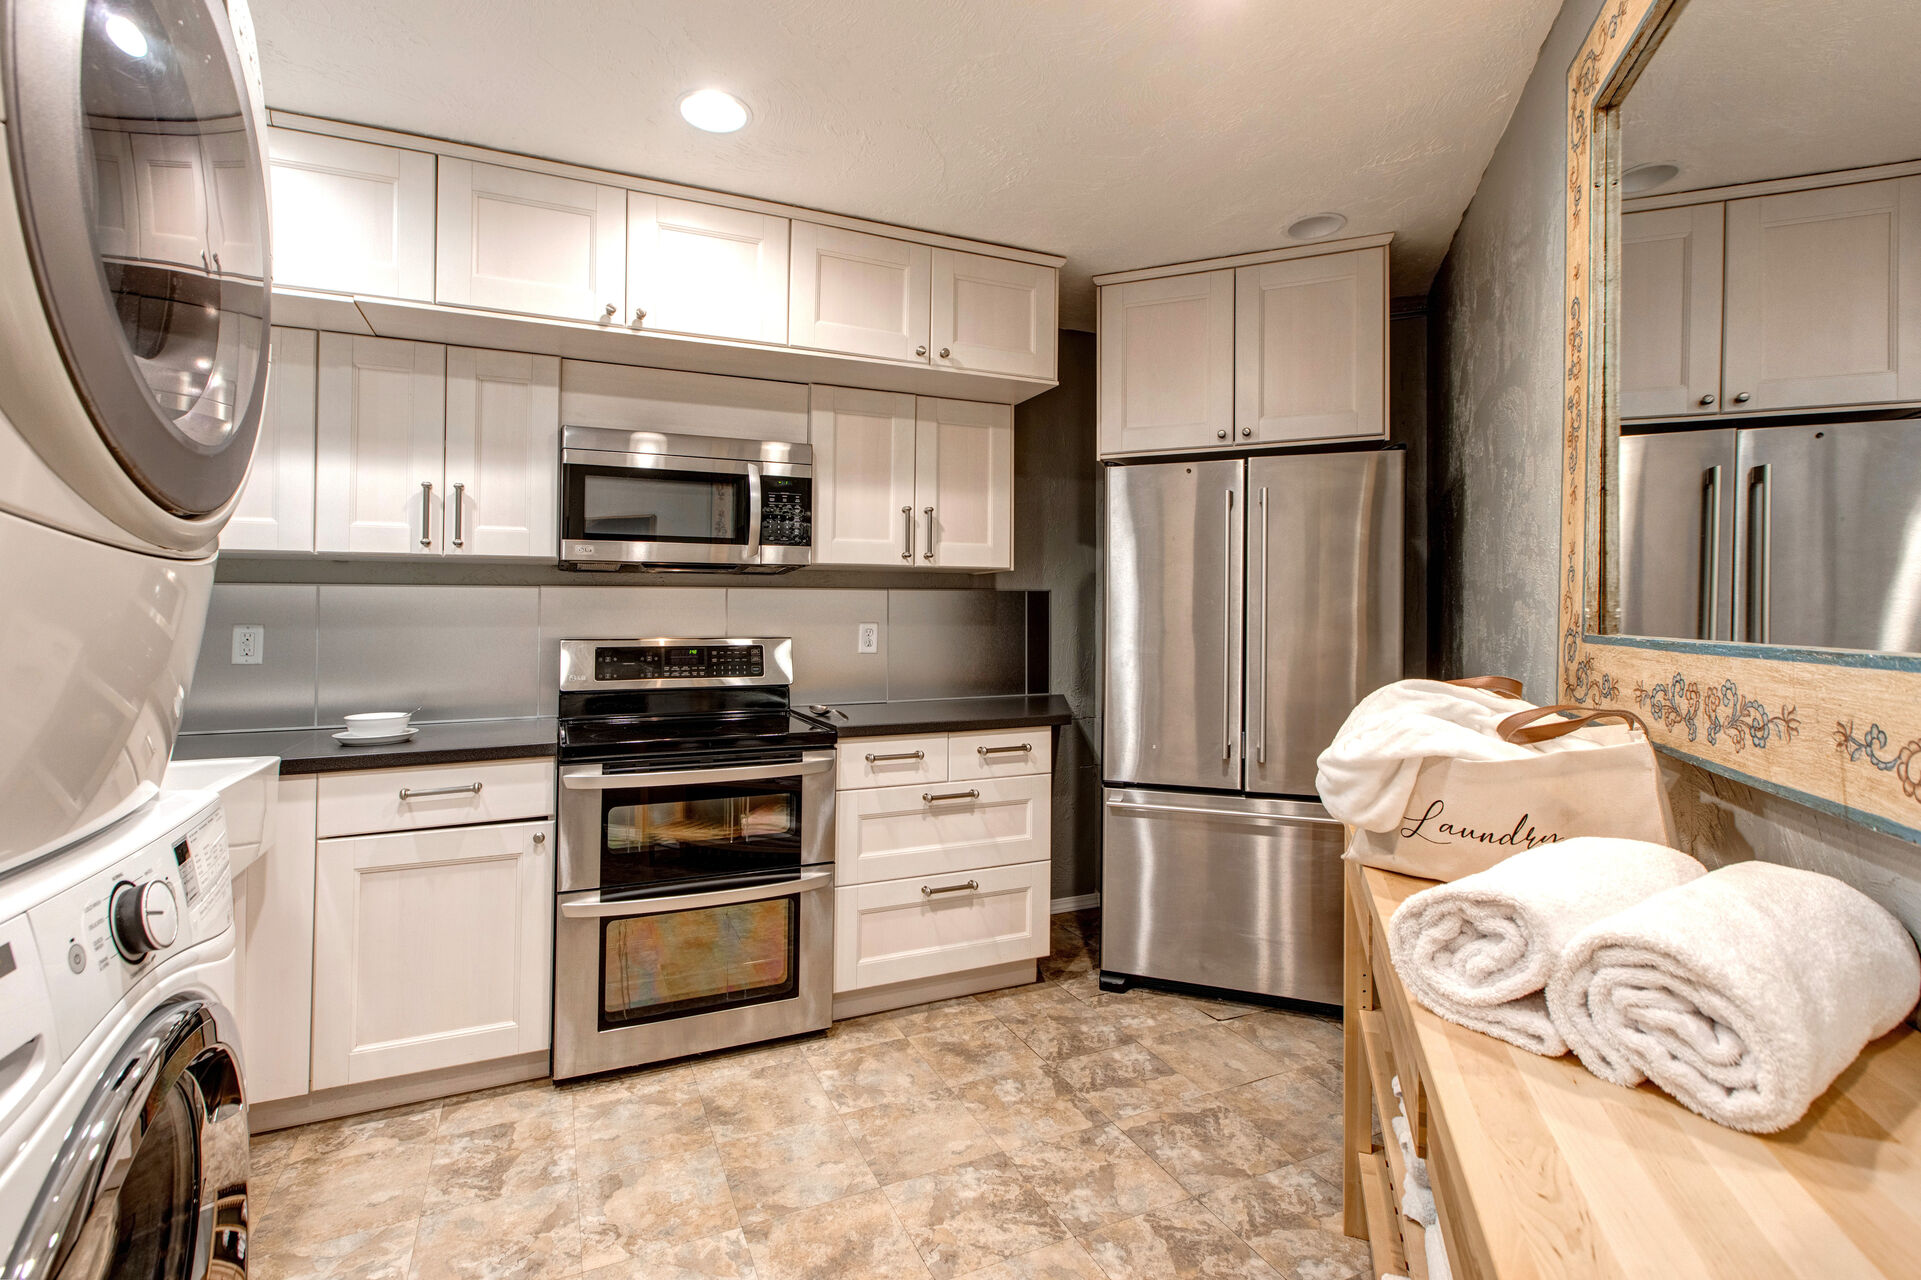 Lower Level Kitchen 2 with ample storage, stainless steel appliances, and full-sized washer and dryer units